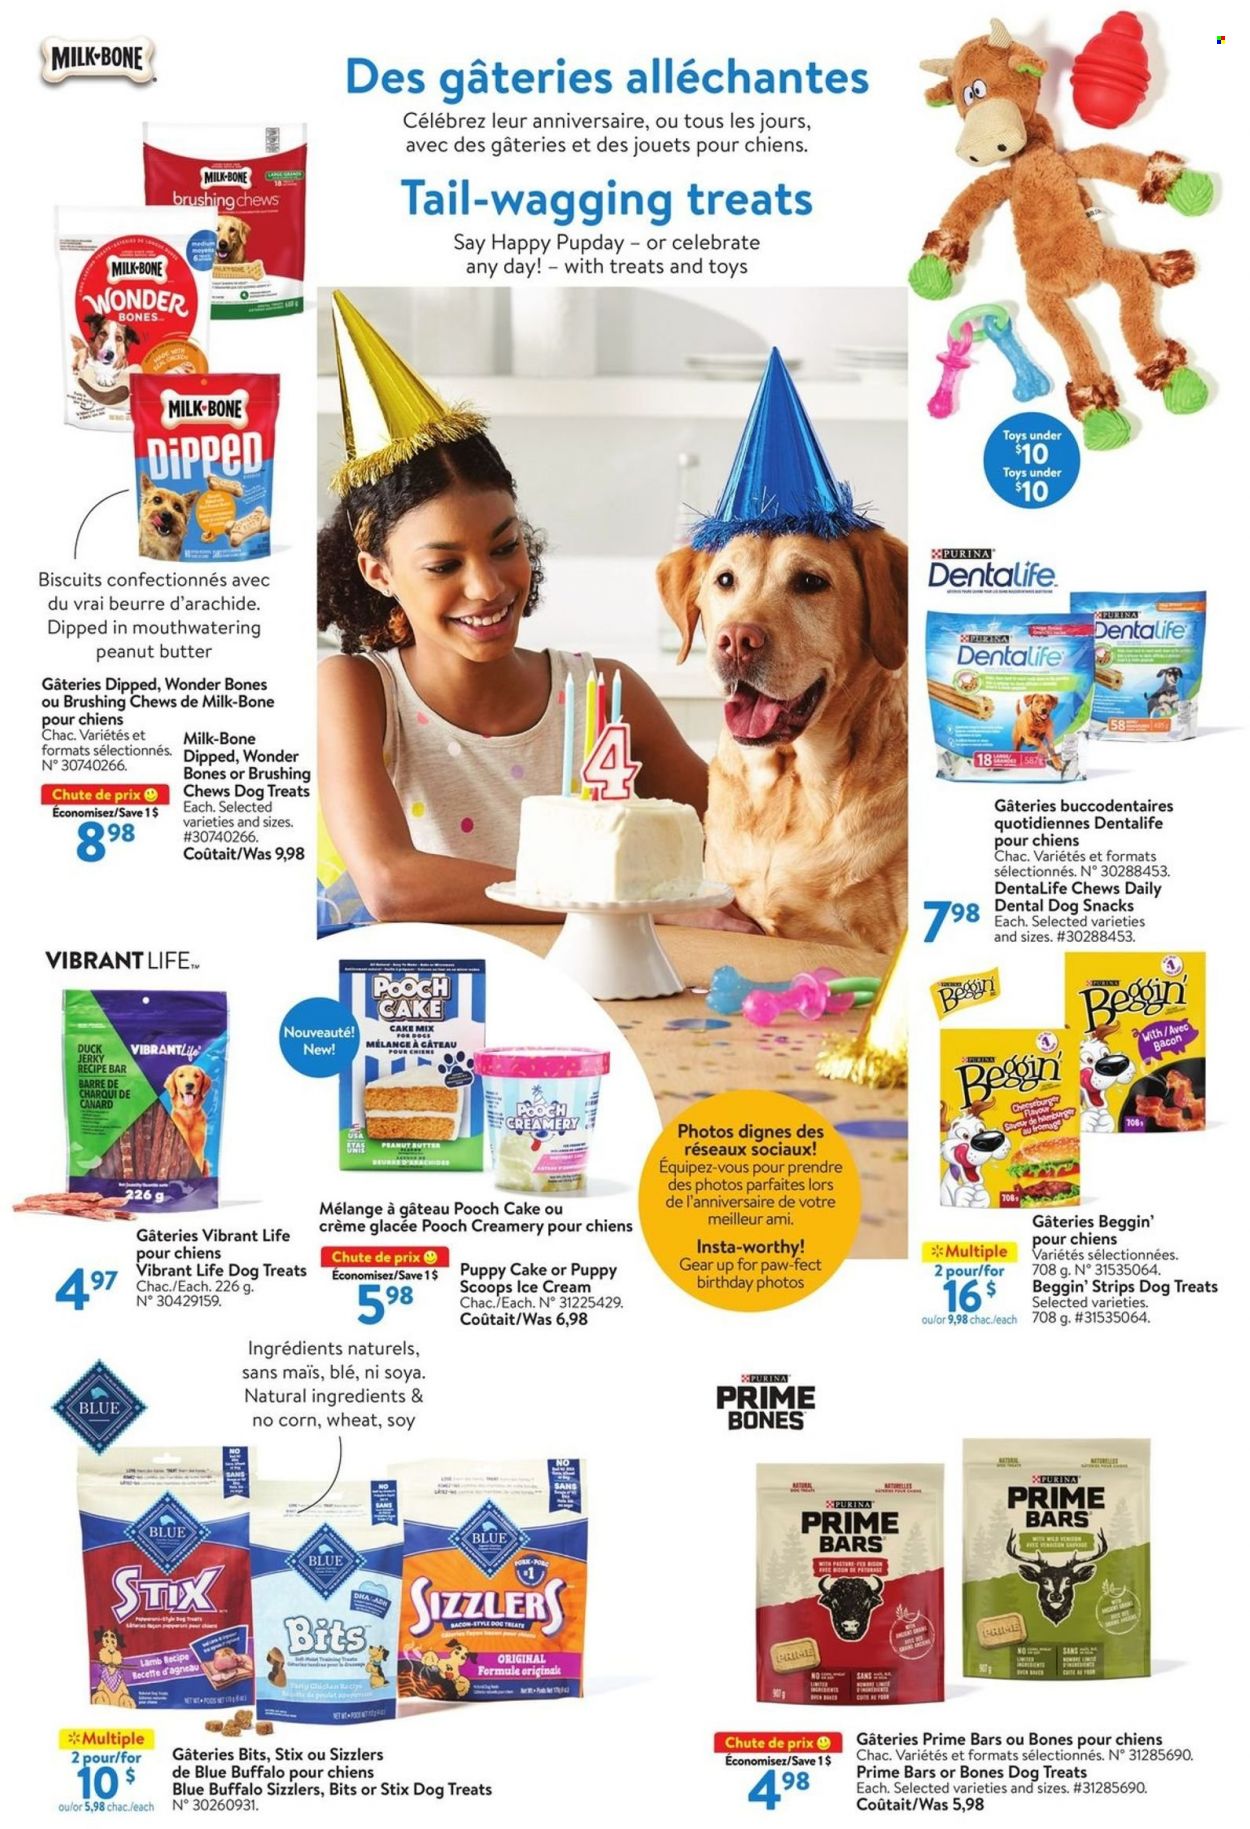 thumbnail - Walmart Flyer - April 21, 2022 - May 18, 2022 - Sales products - cake mix, bacon, jerky, duck jerky, milk, snack, chewing gum, peanut butter, Blue Buffalo, Purina, Dentalife, Beggin'. Page 5.